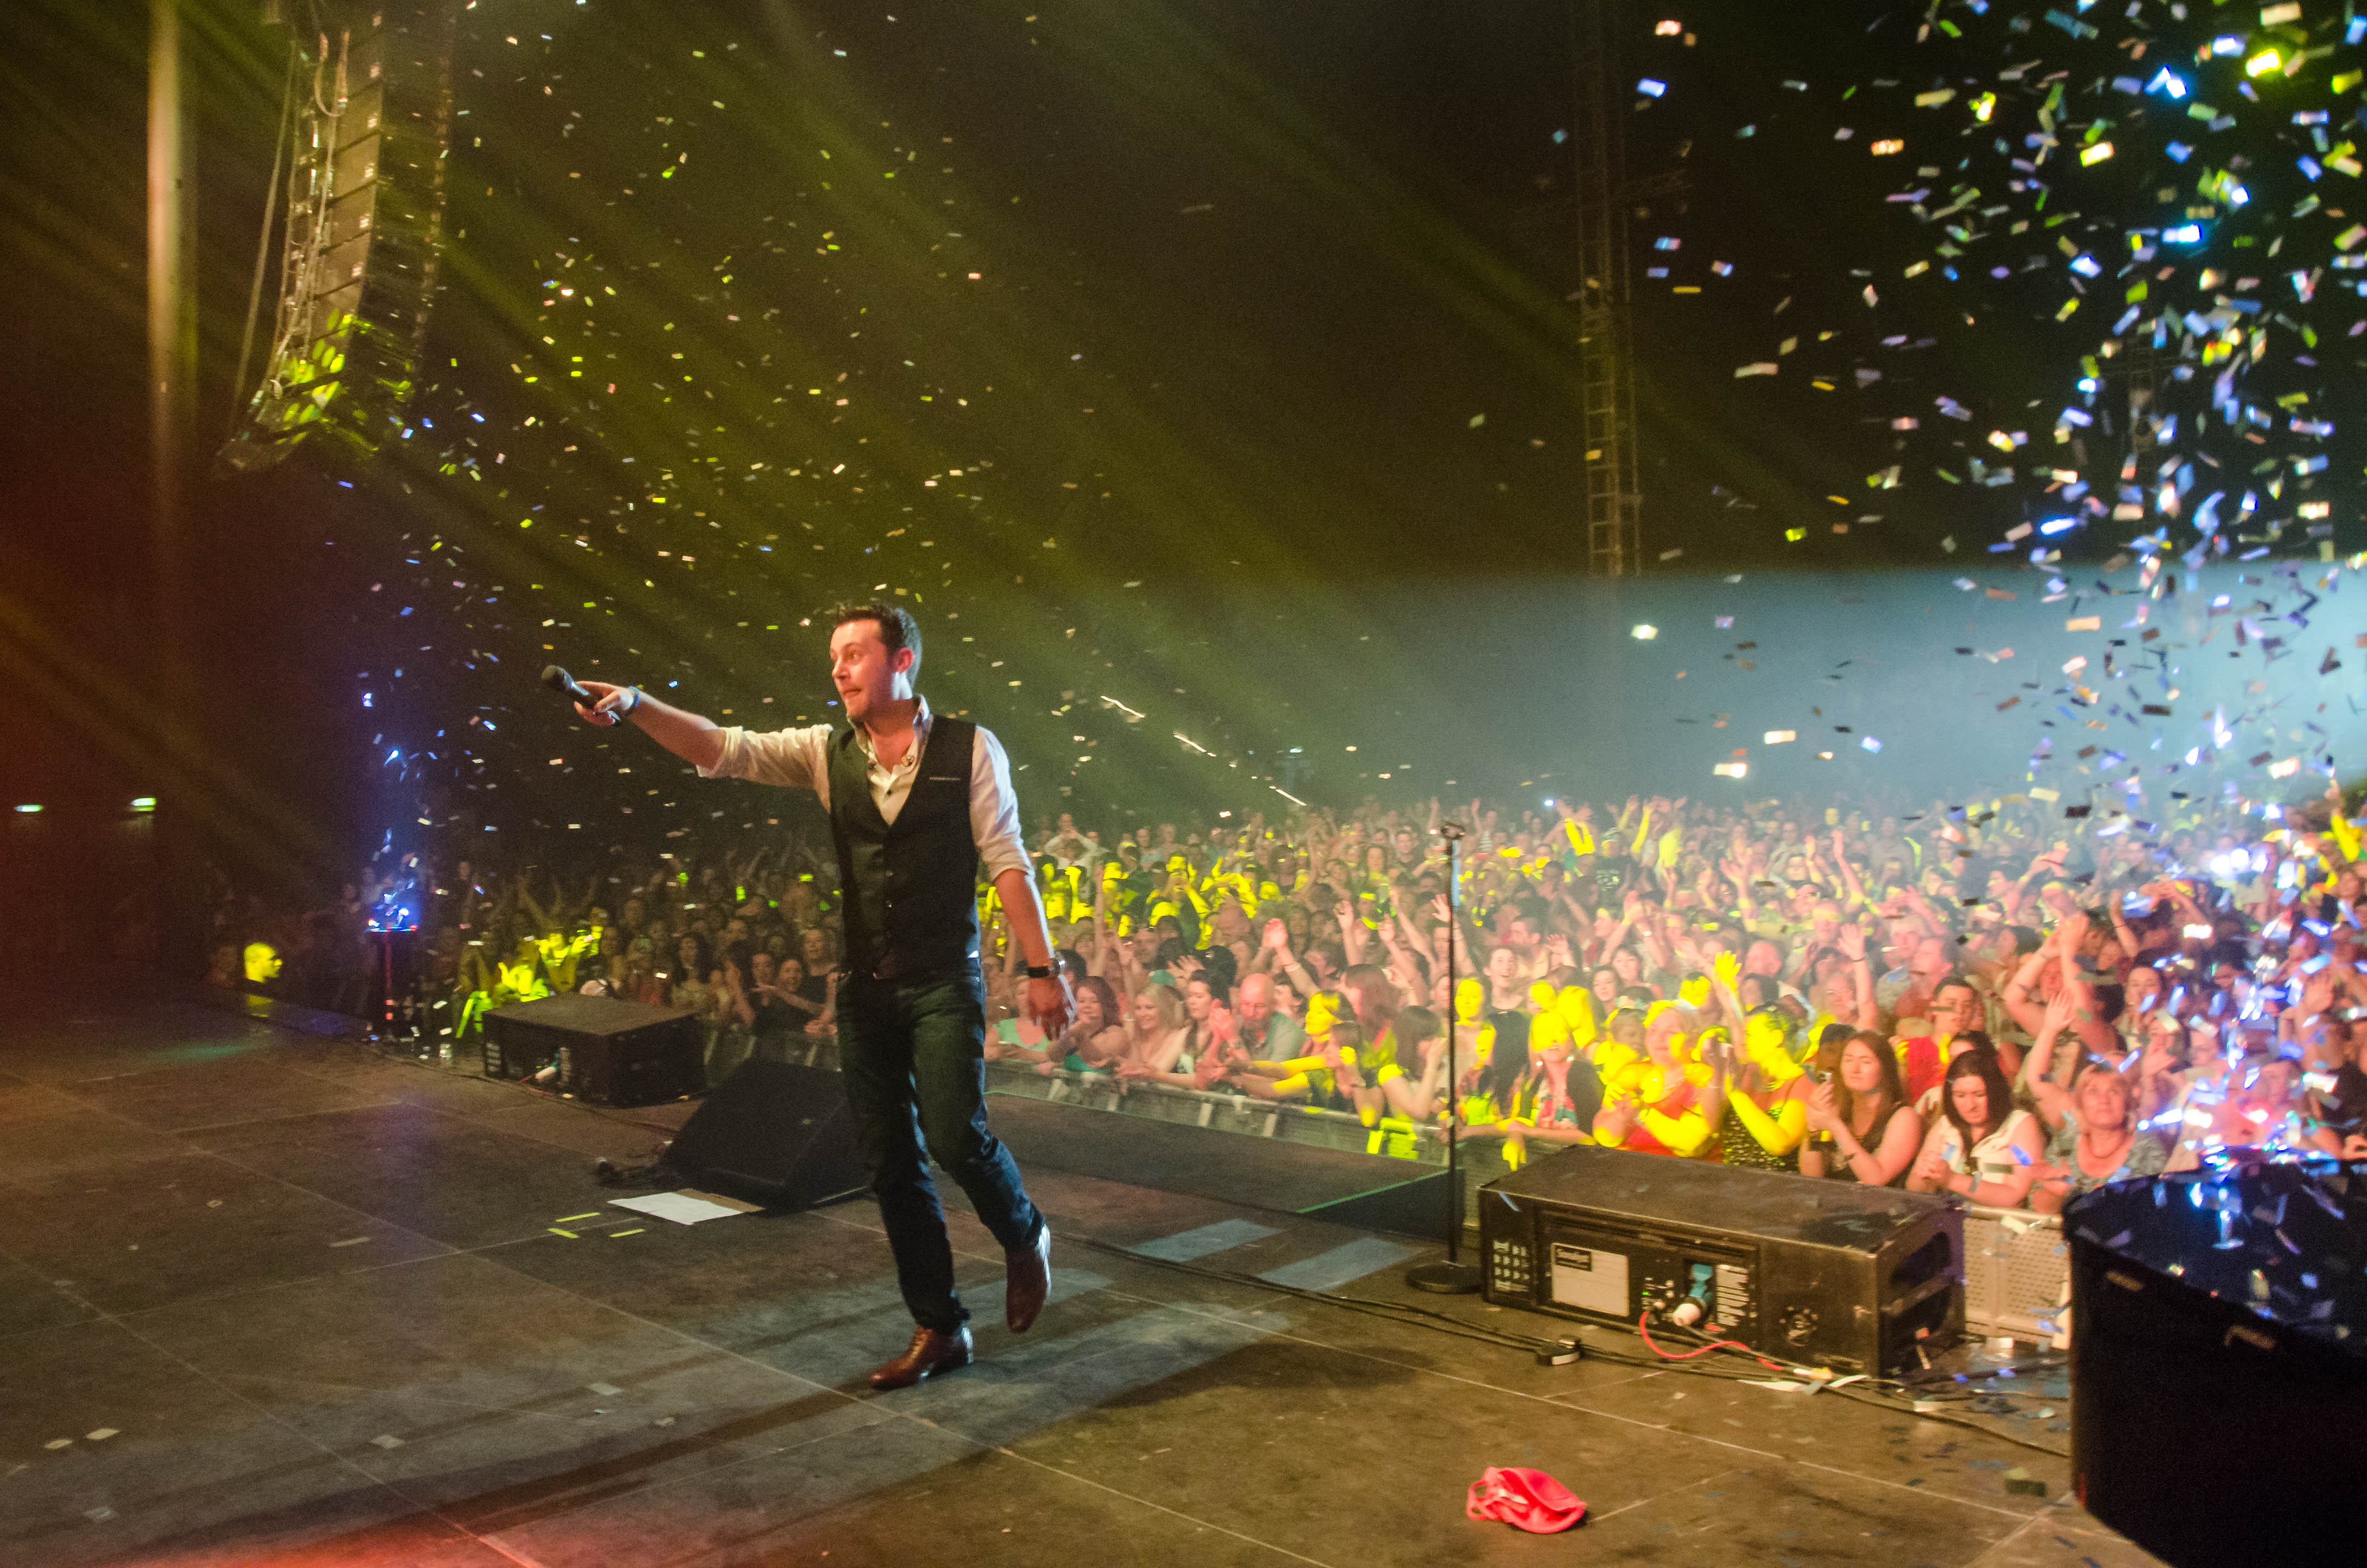 nathan-carter-at-the-marquee-cork-by-sean-smyth-15-6-14-55-of-55